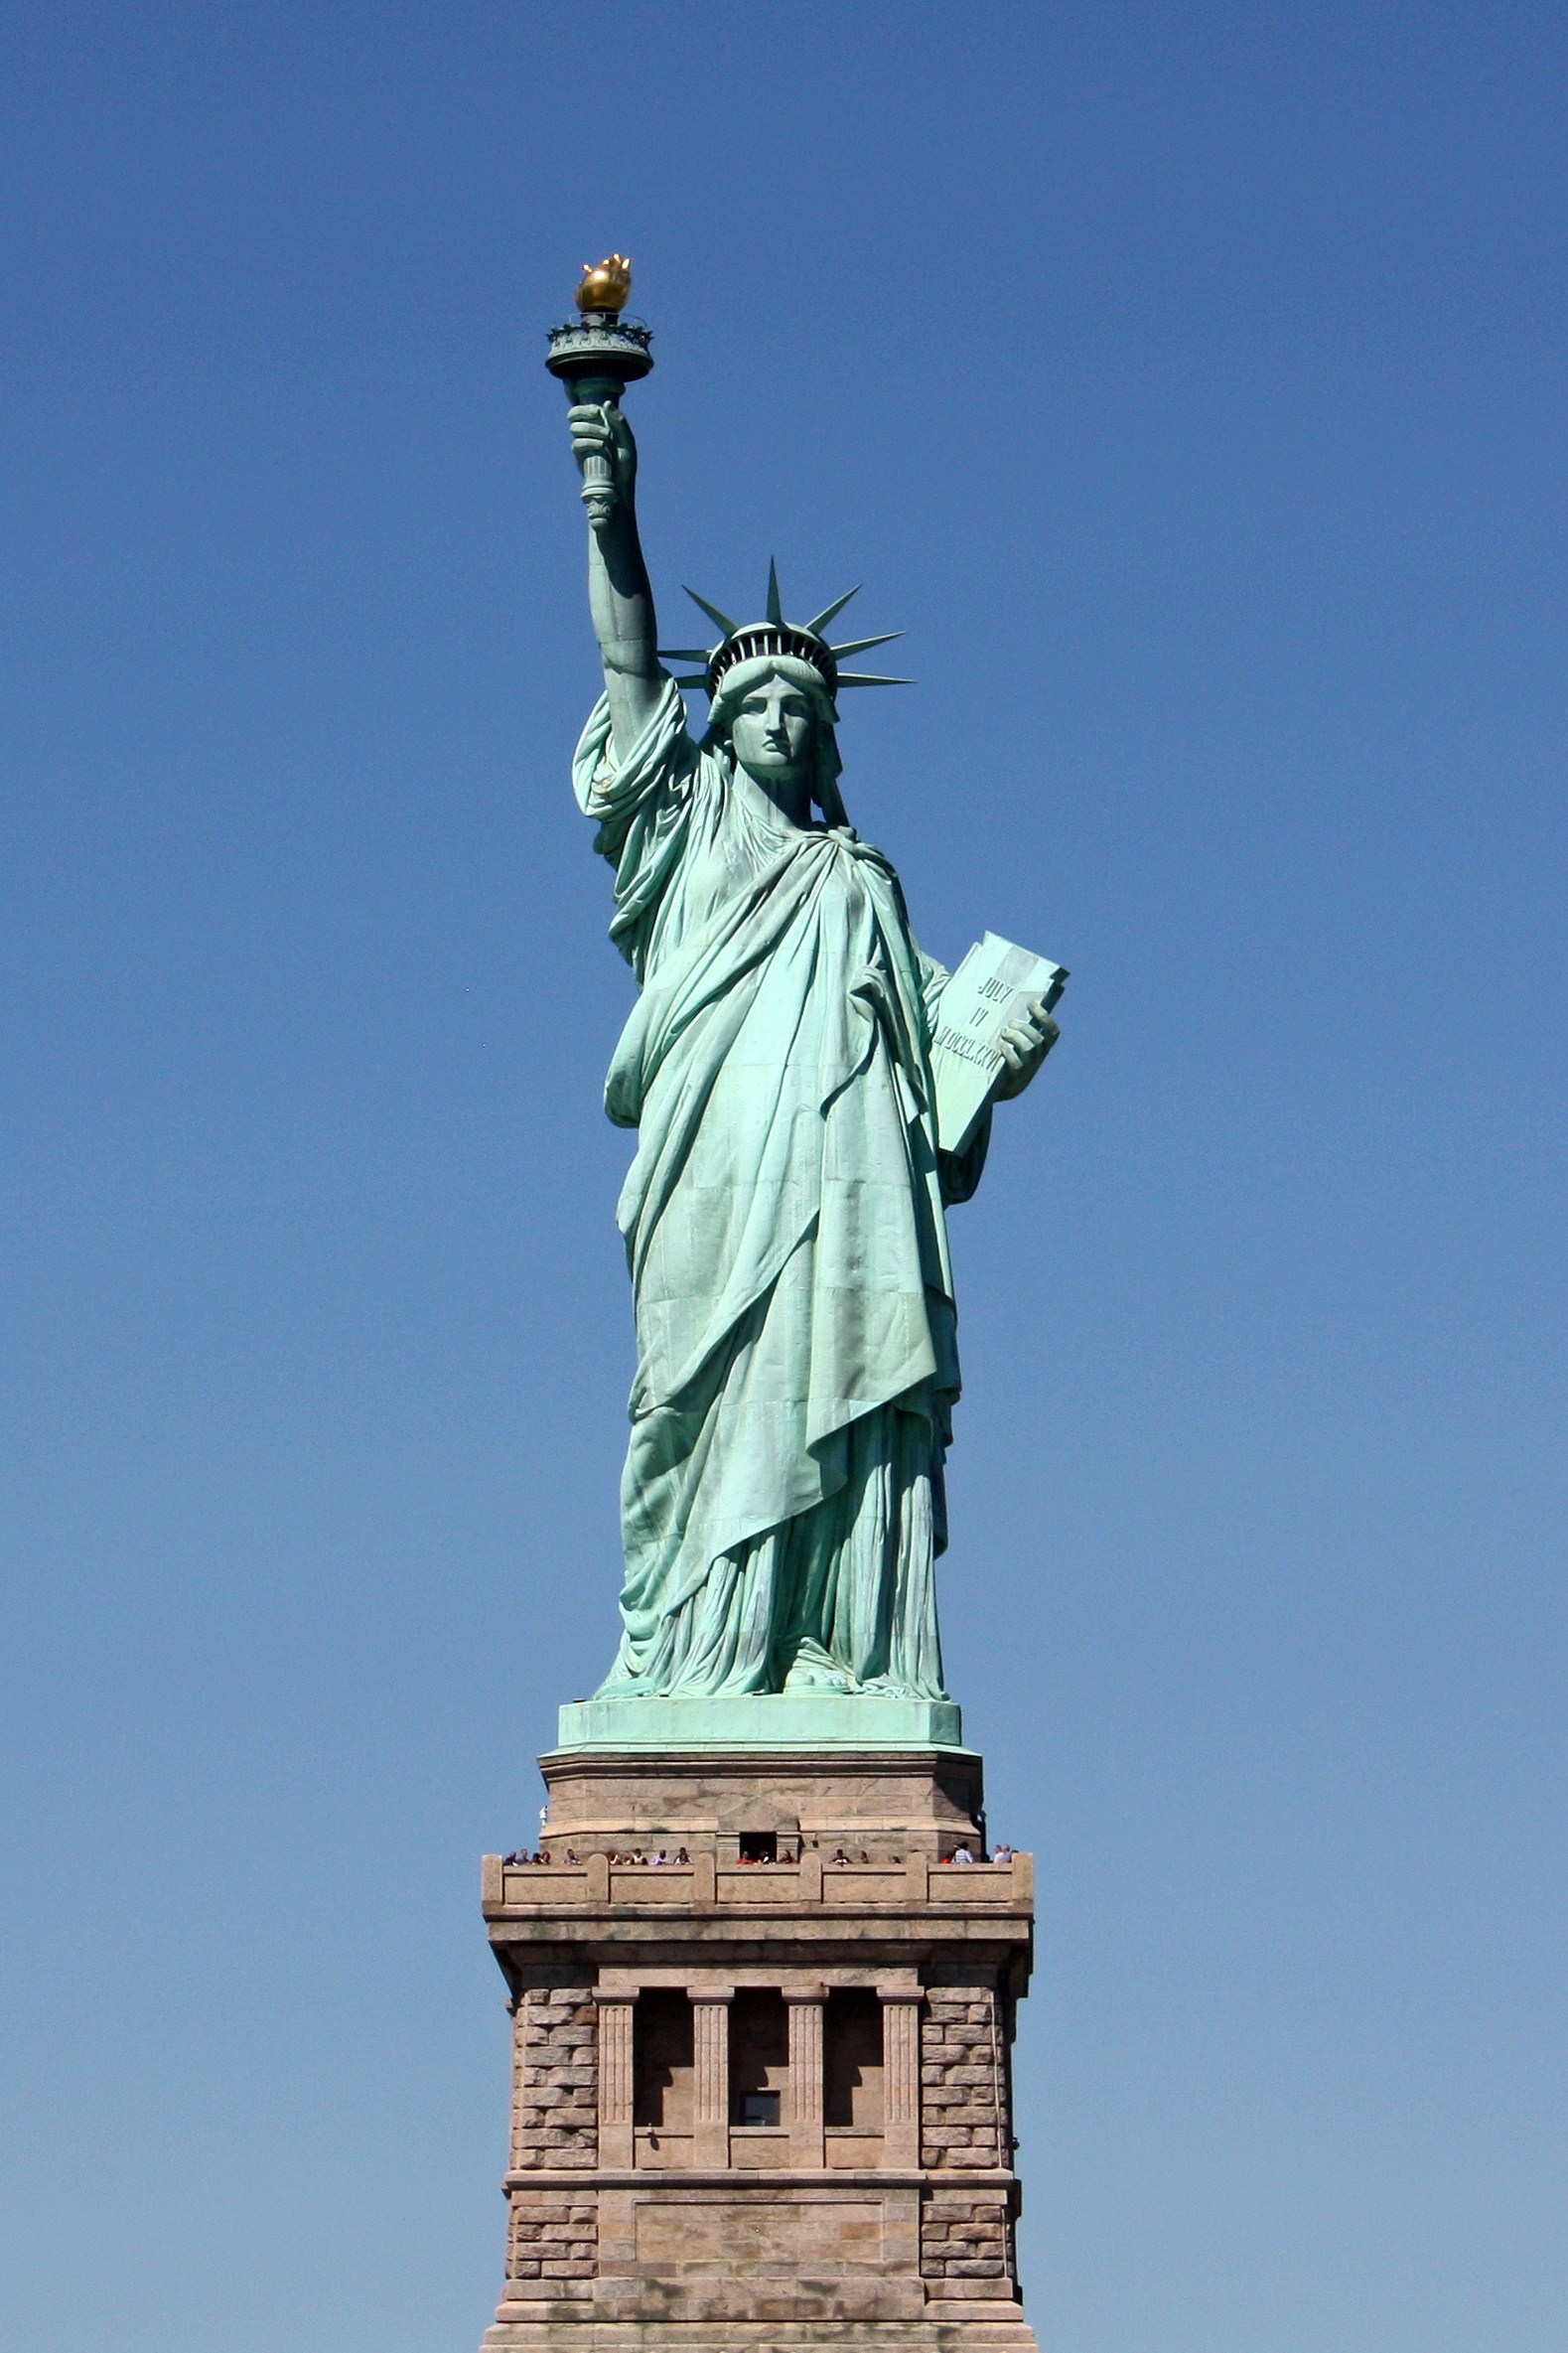 The green Statue of Liberty standing over New York Harbor, holding a torch toward a clear blue sky.